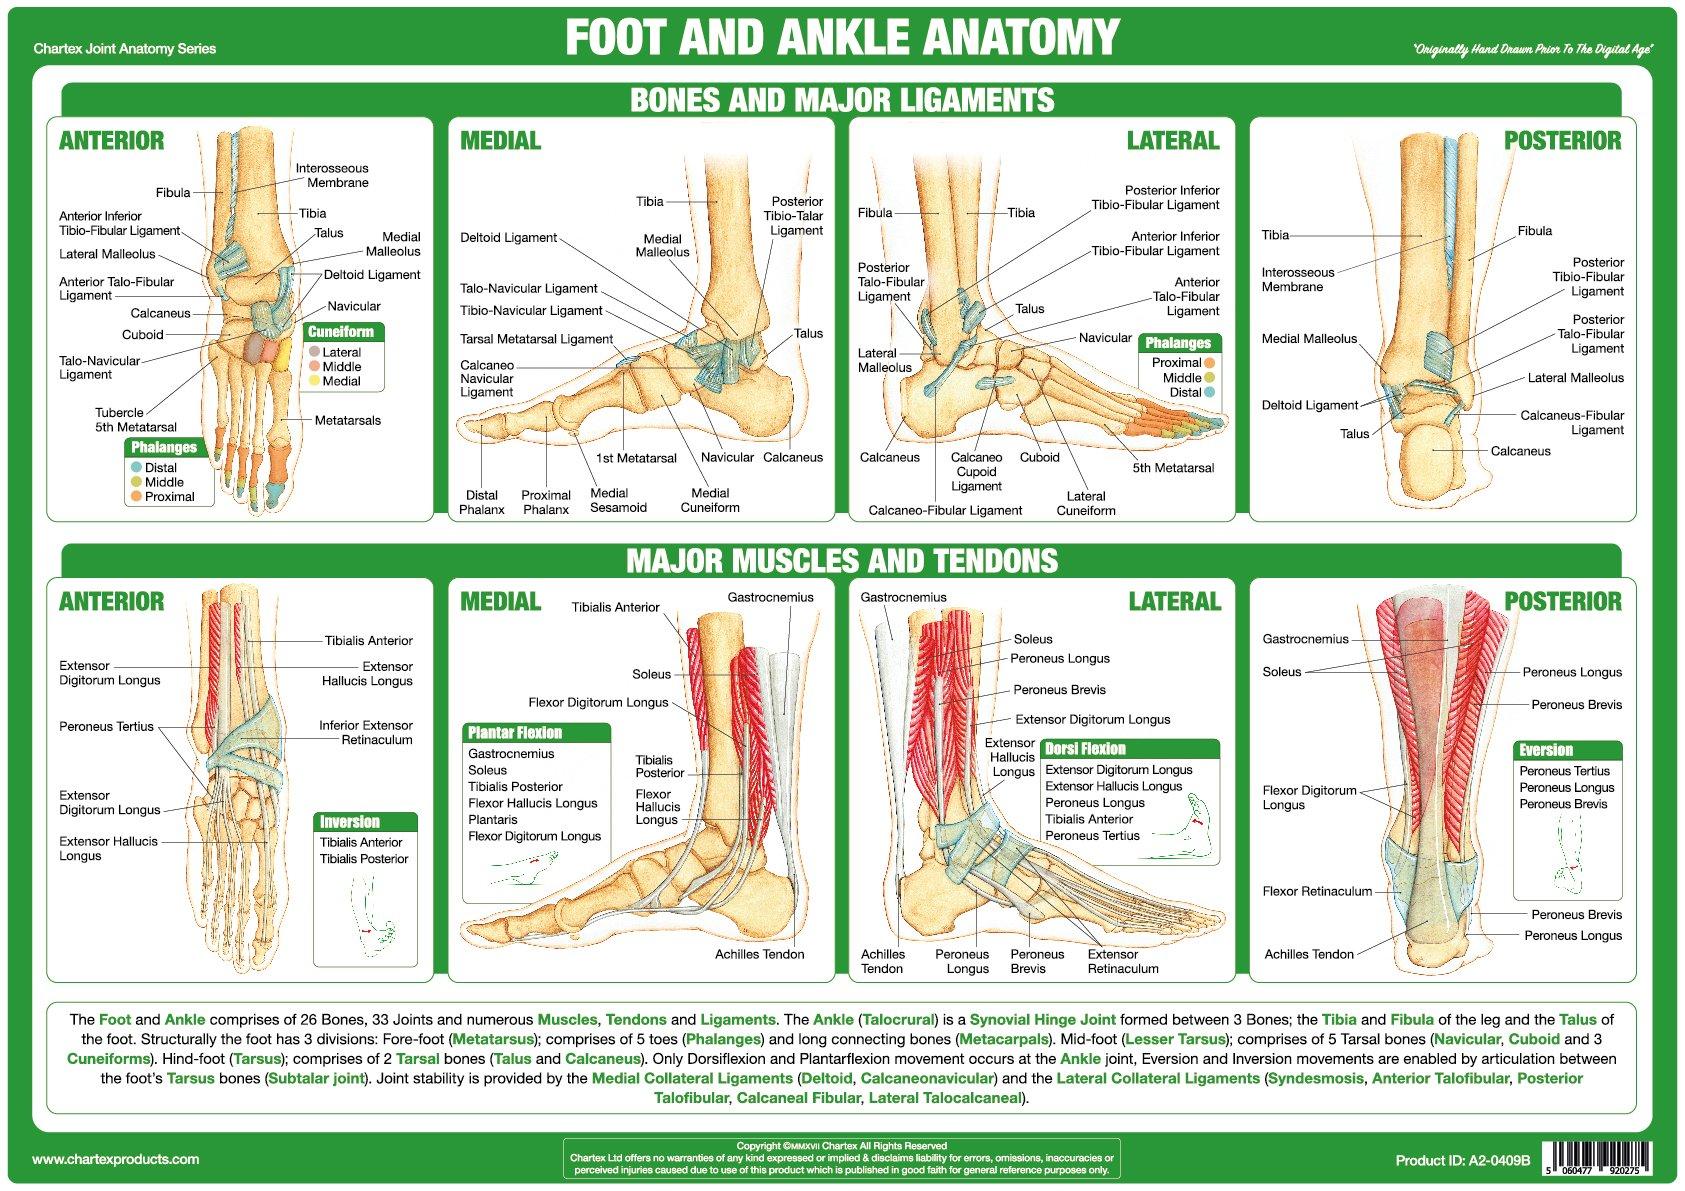 Foot and Ankle Joint Anatomy Chart